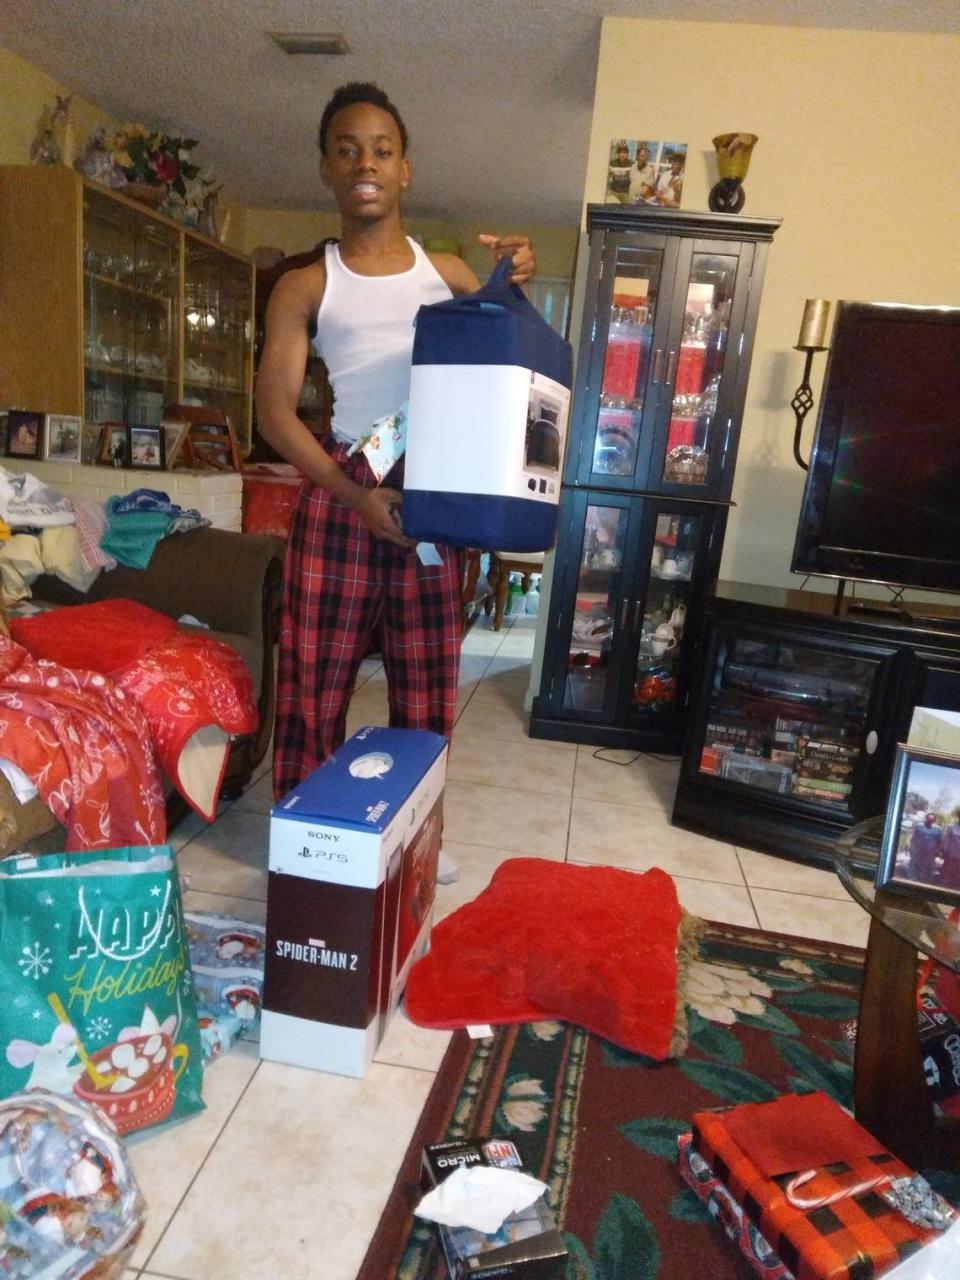 John Deandre, 13, is being raised by his great grandparents Evie and Rupert Lounges in Lauderdale Lakes. His great grandmother’s photo shows some of the holiday presents, including a PlayStation, comforter set and clothing, he received this year from Wish Book donors.